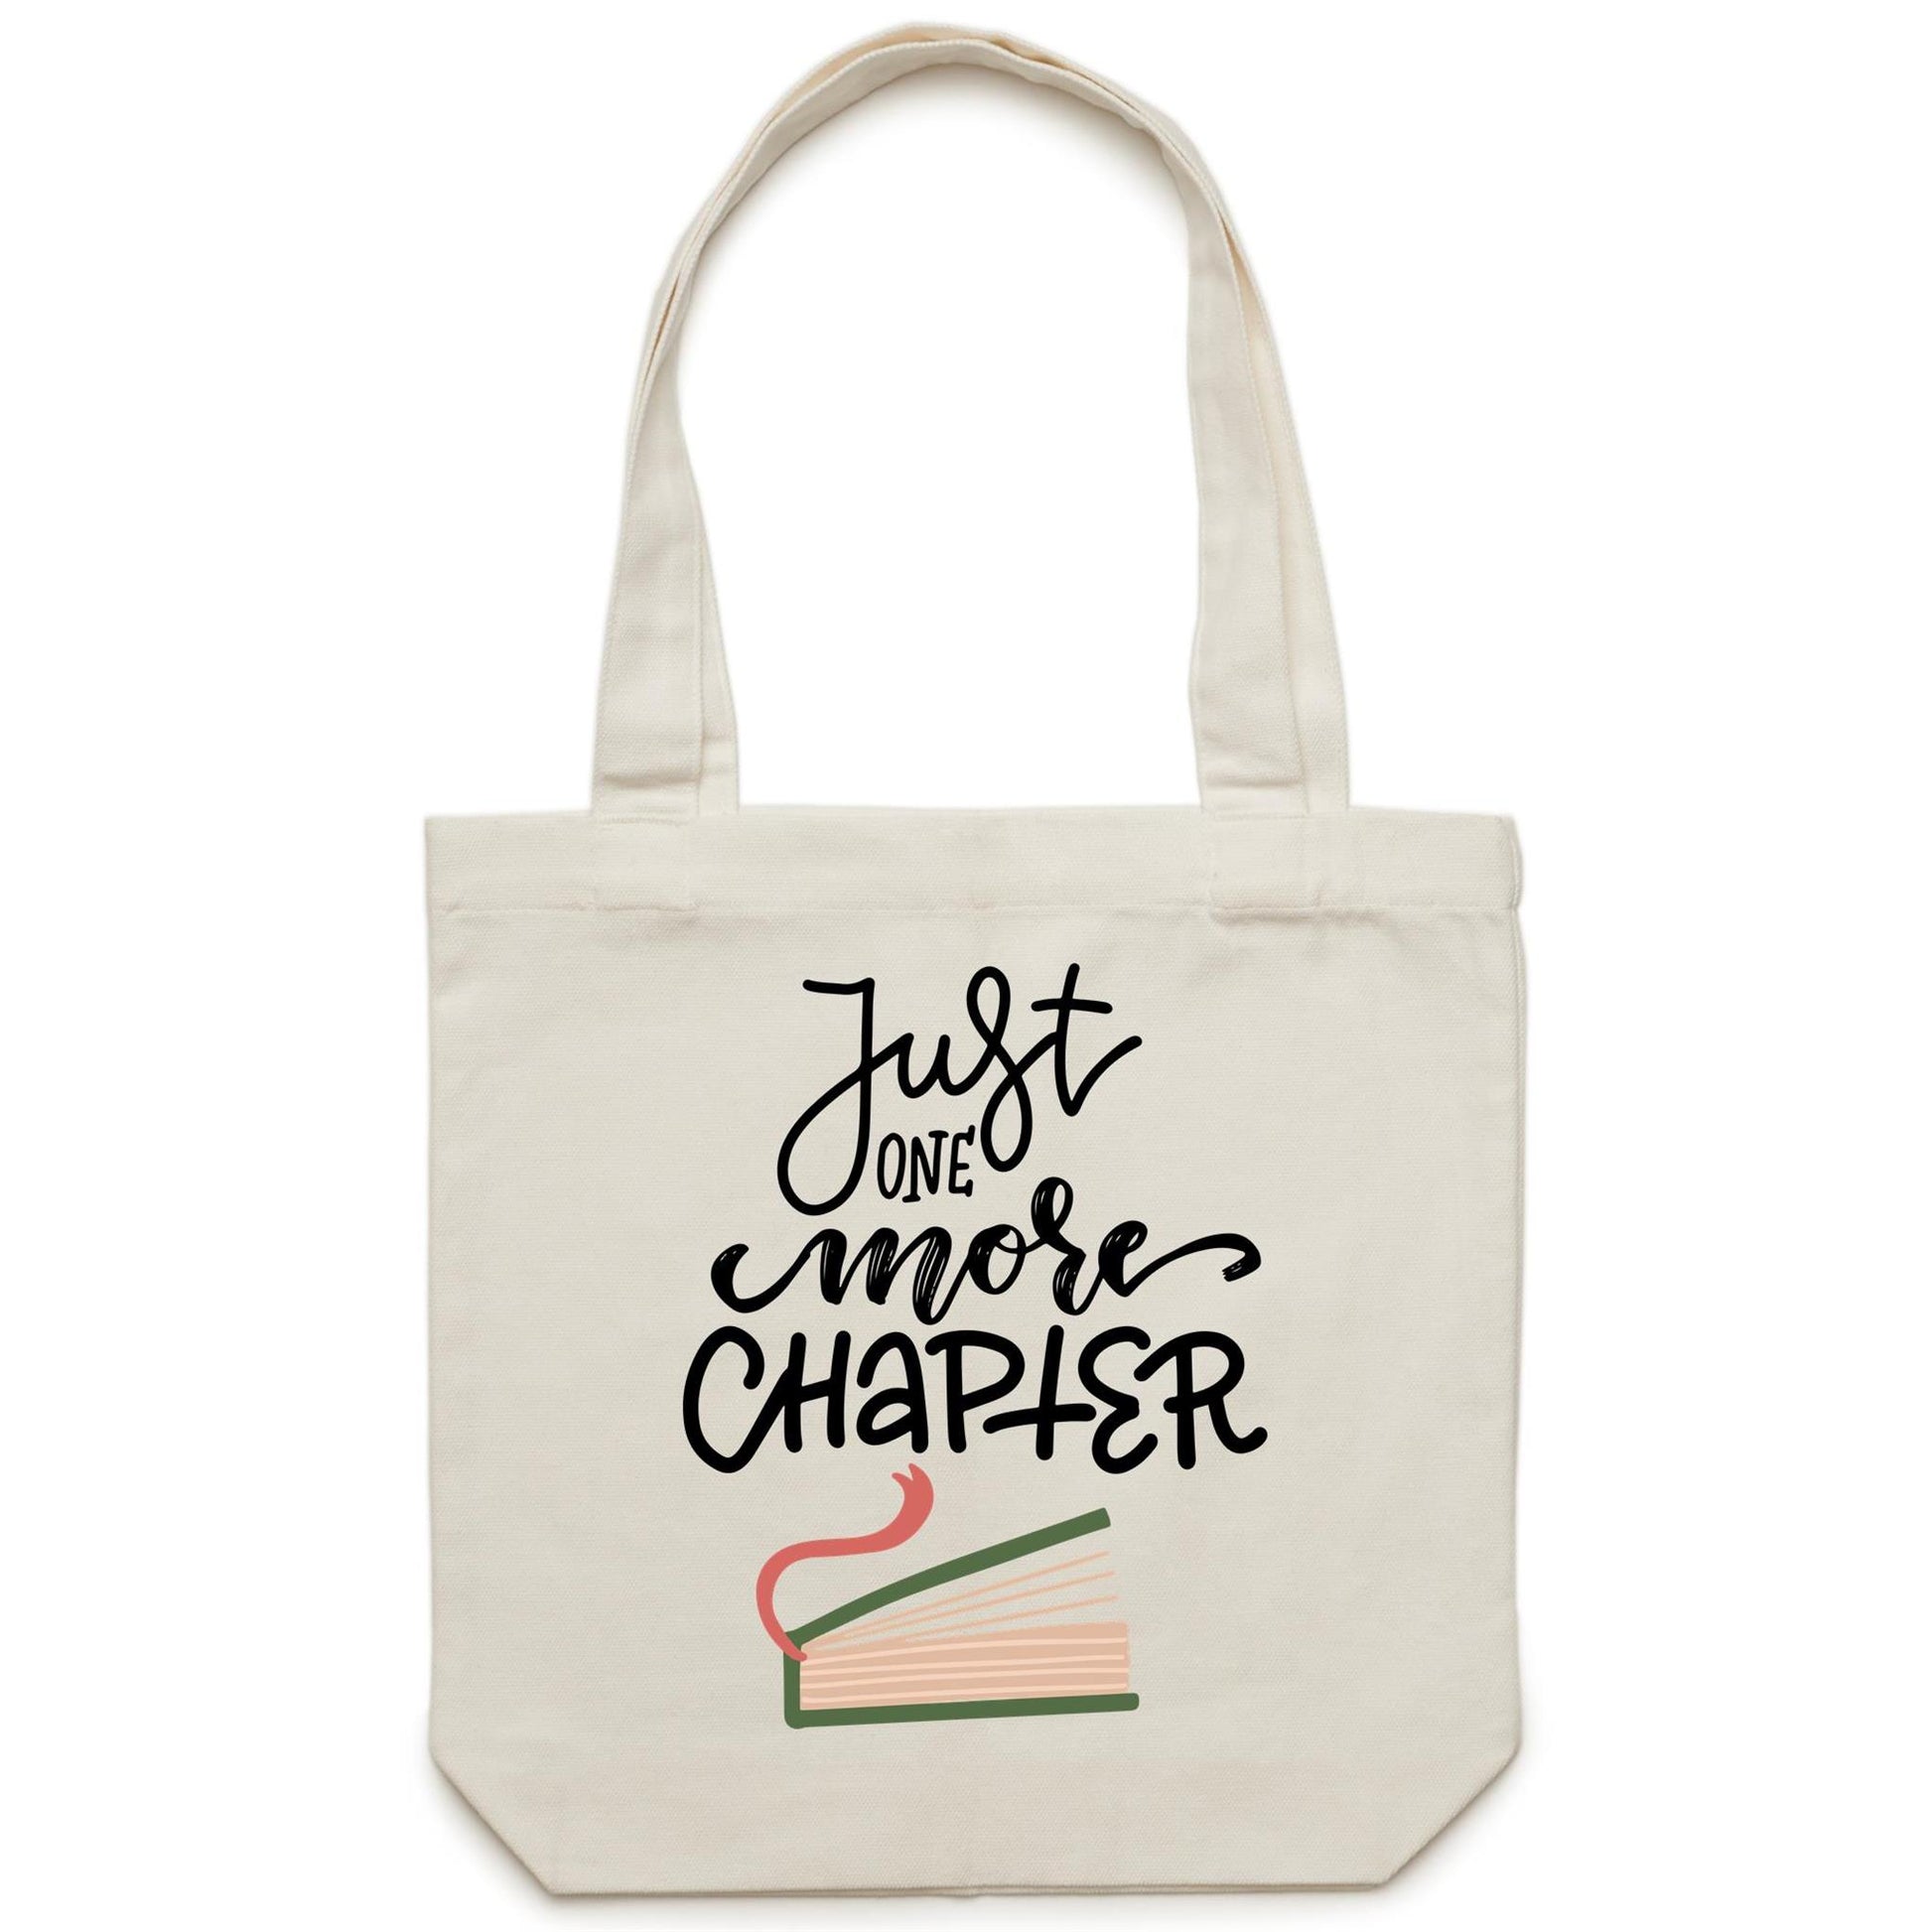 Just One More Chapter - Canvas Tote Bag Default Title Tote Bag Reading